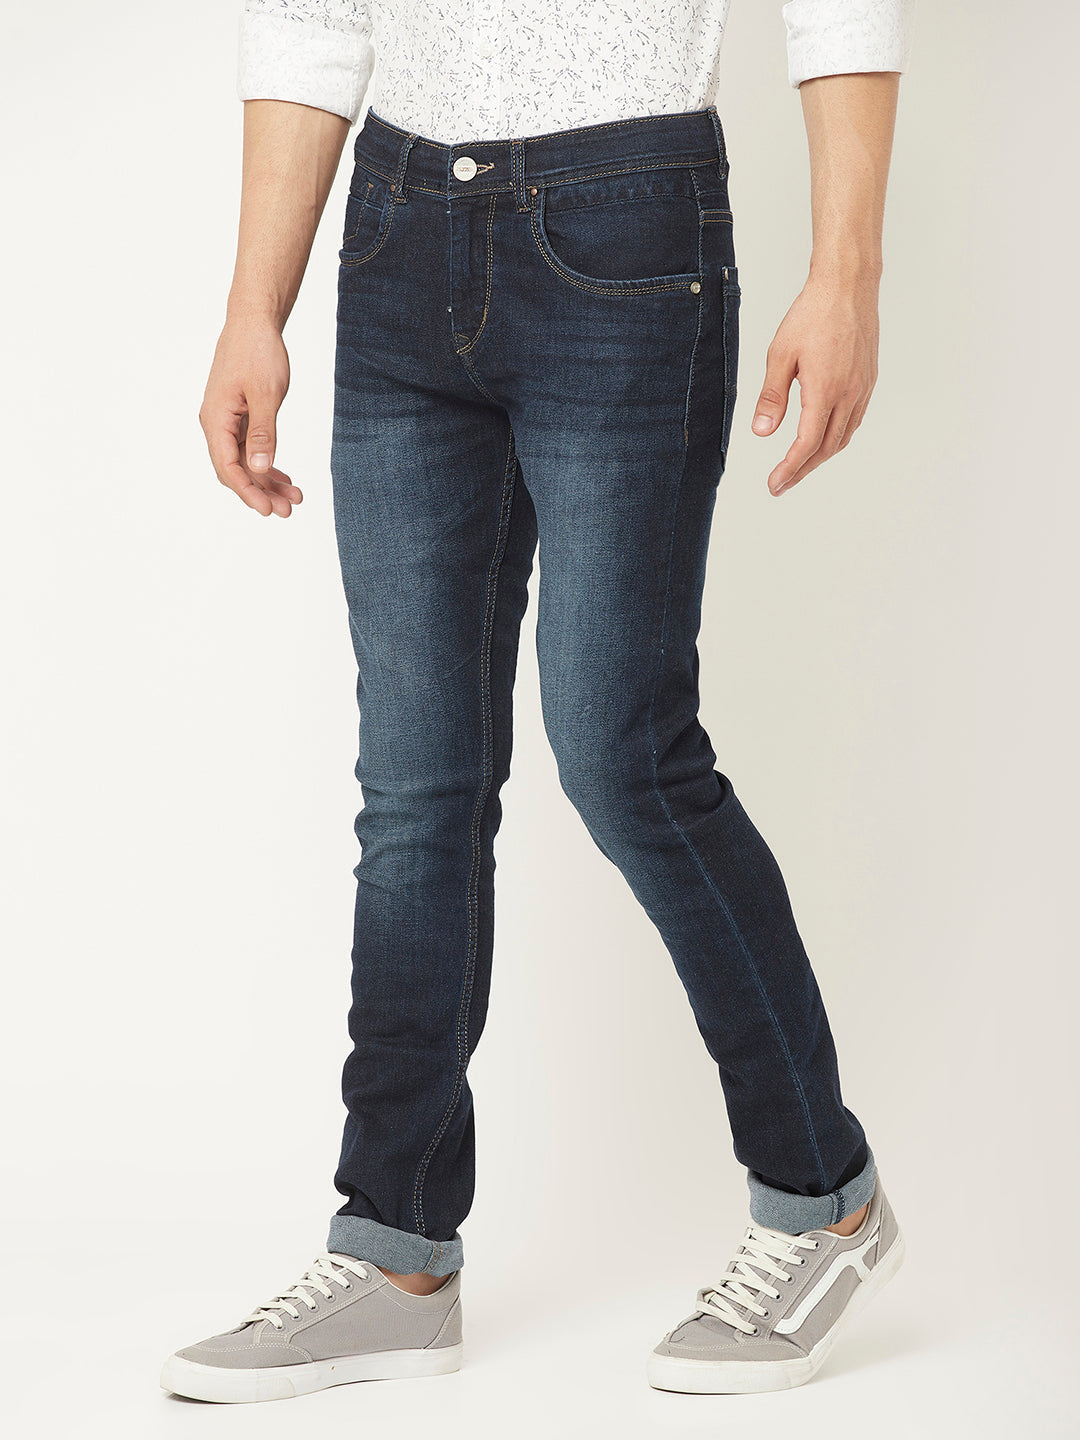  Dark Blue Jeans with 5 Pocket Styling 